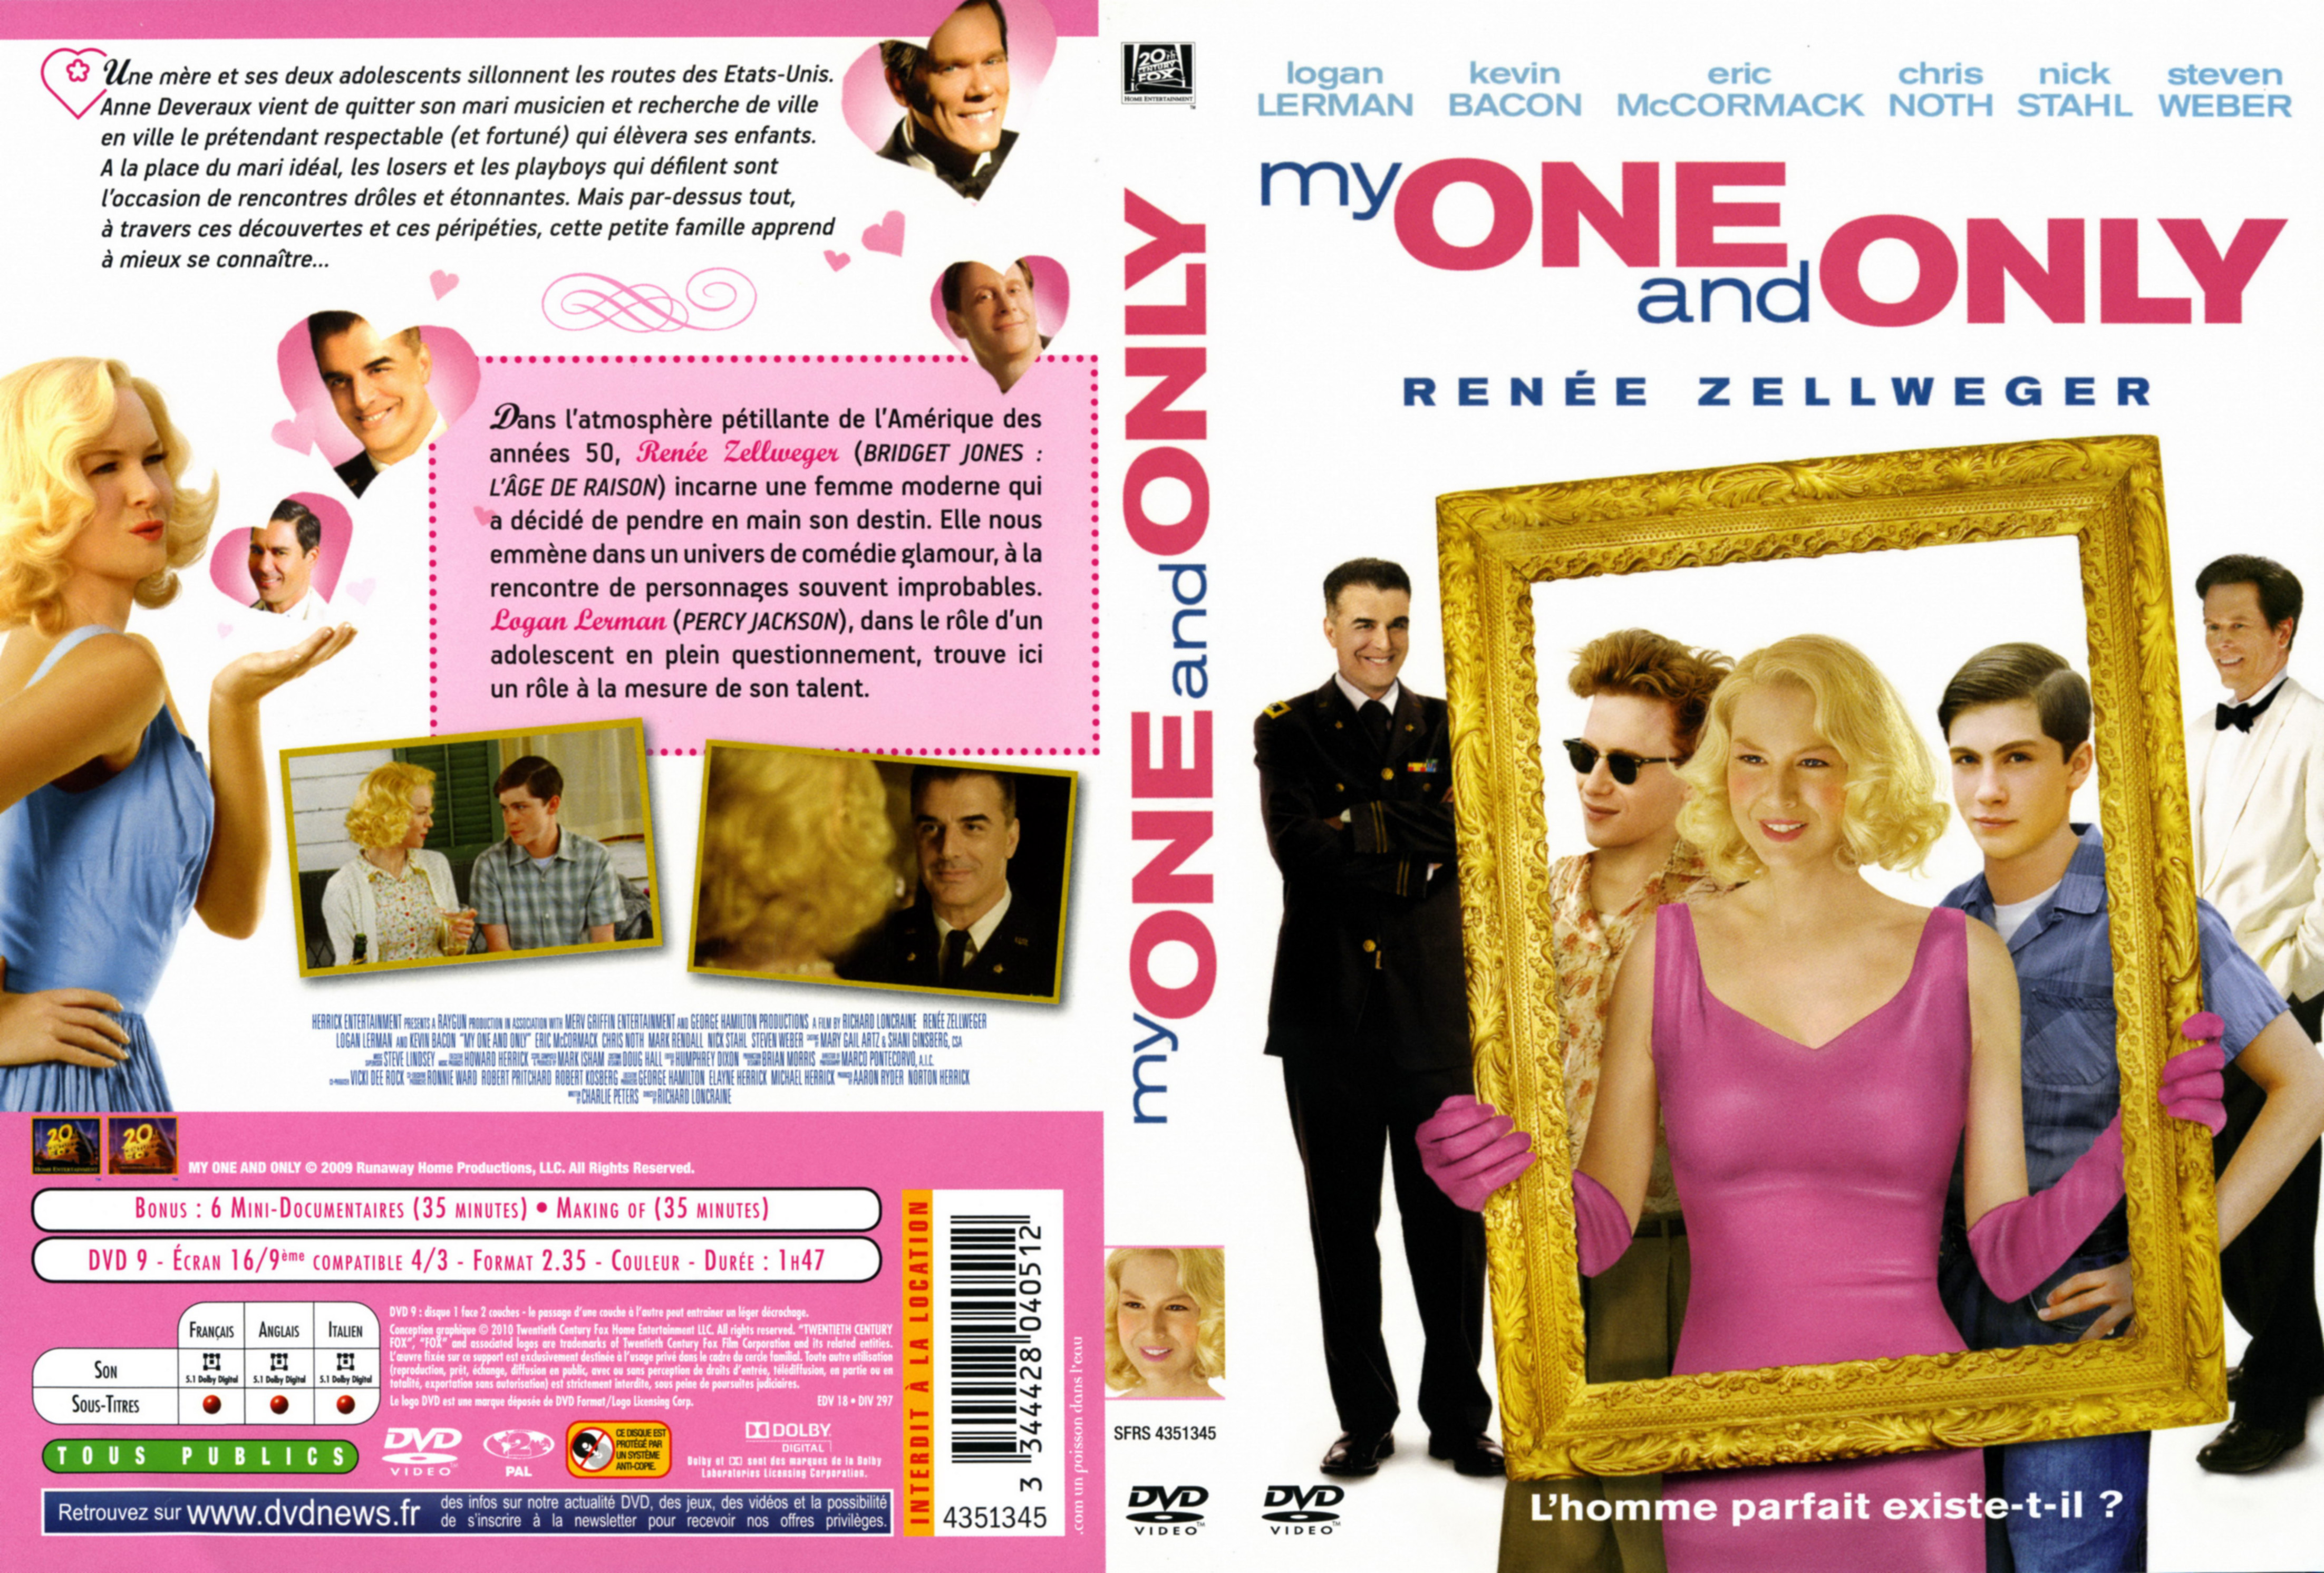 Jaquette DVD My one and only